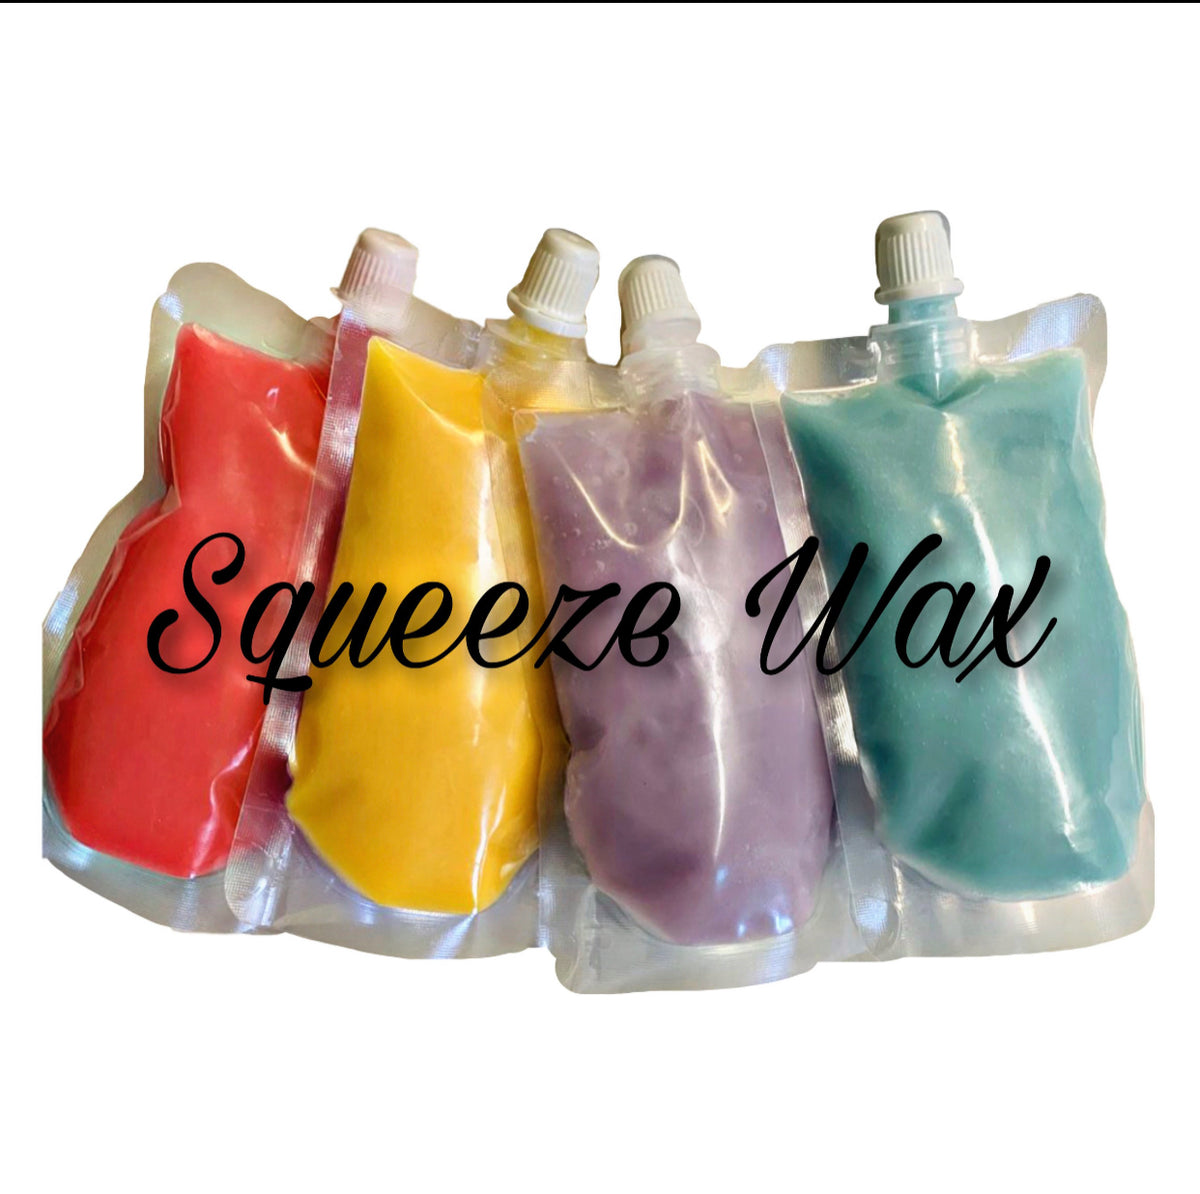 Squeezable Highly Scented Squeeze Wax Melts for Long-Lasting Home Fragrance  Unique Wax For Warmer Tarts with Strong-Smelling Bakery Scents as seen on